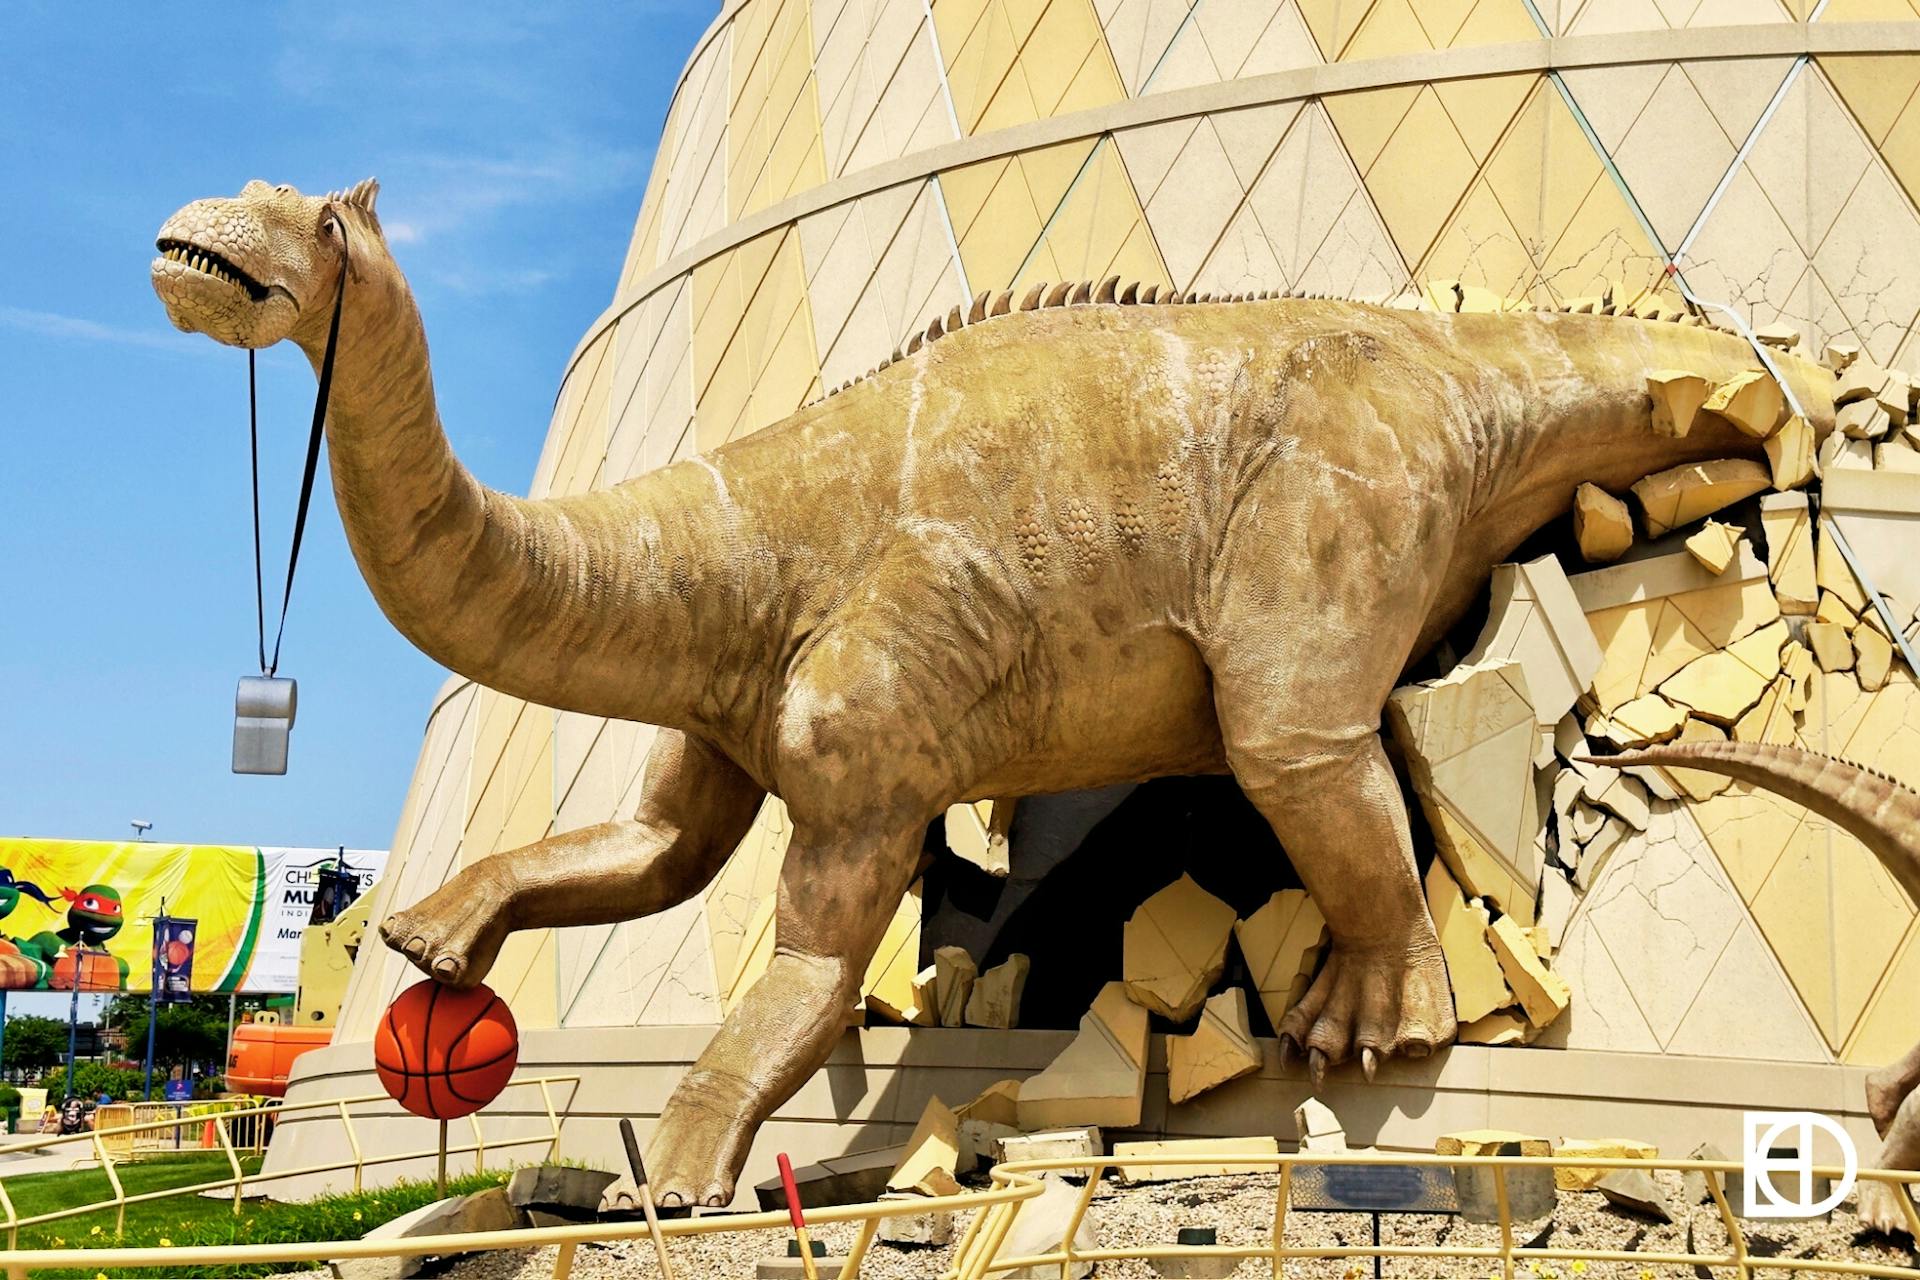 Exterior photo of the Childrens Museum, showing dinosaur statue